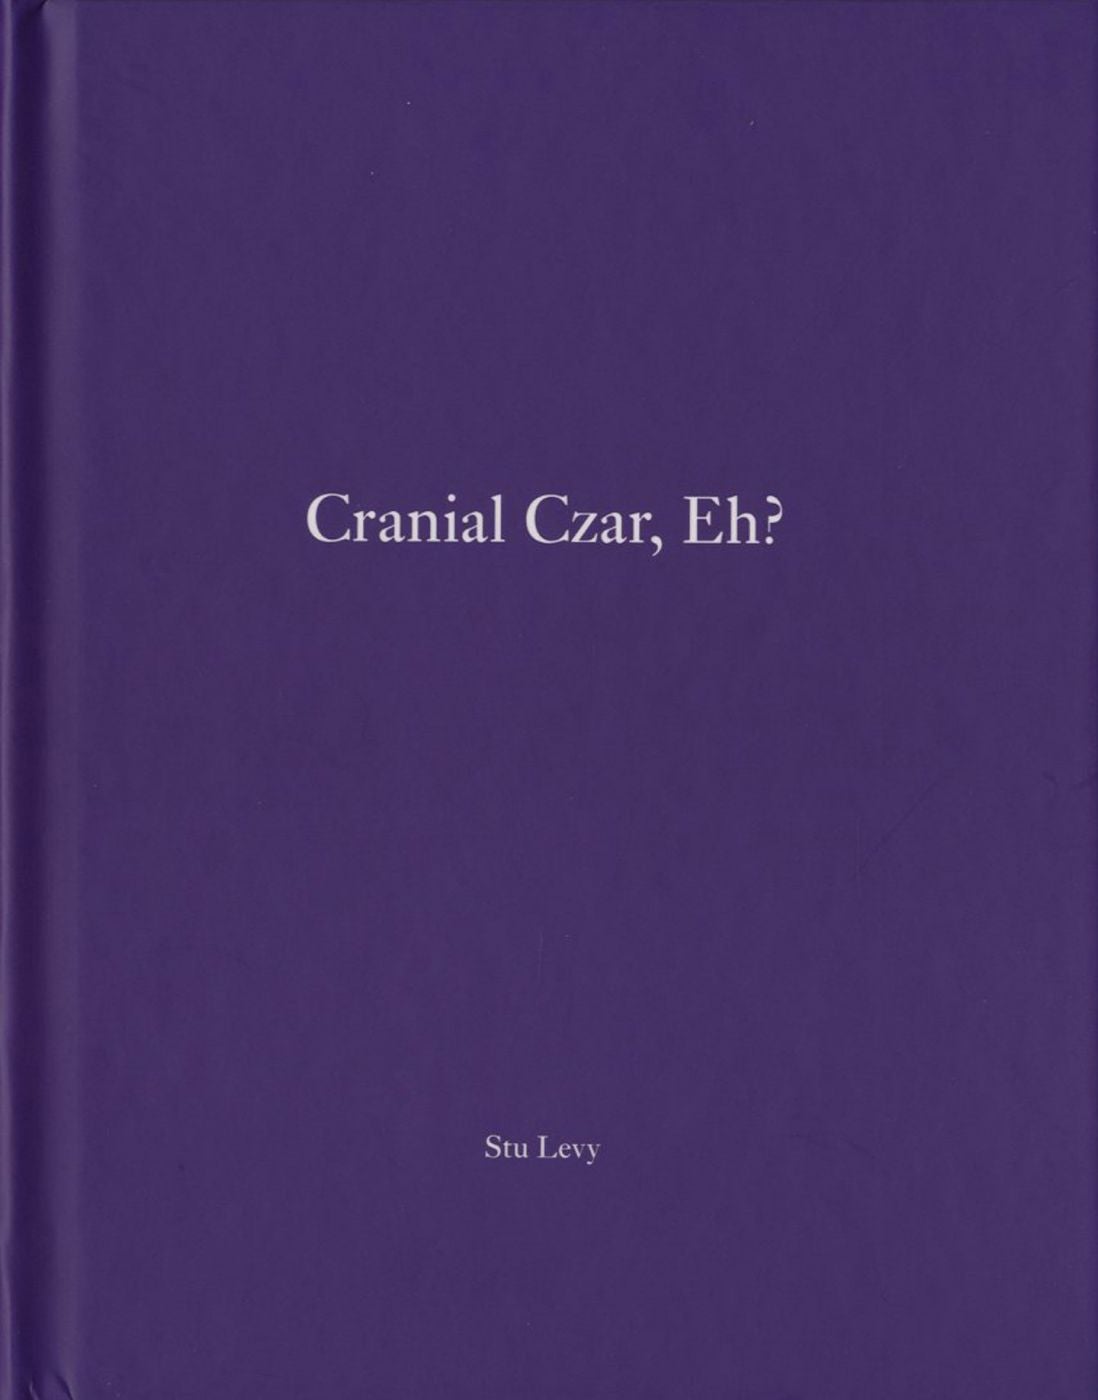 Stu Levy: Cranial Czar, Eh? (One Picture Book #30), Limited Edition (with Print)